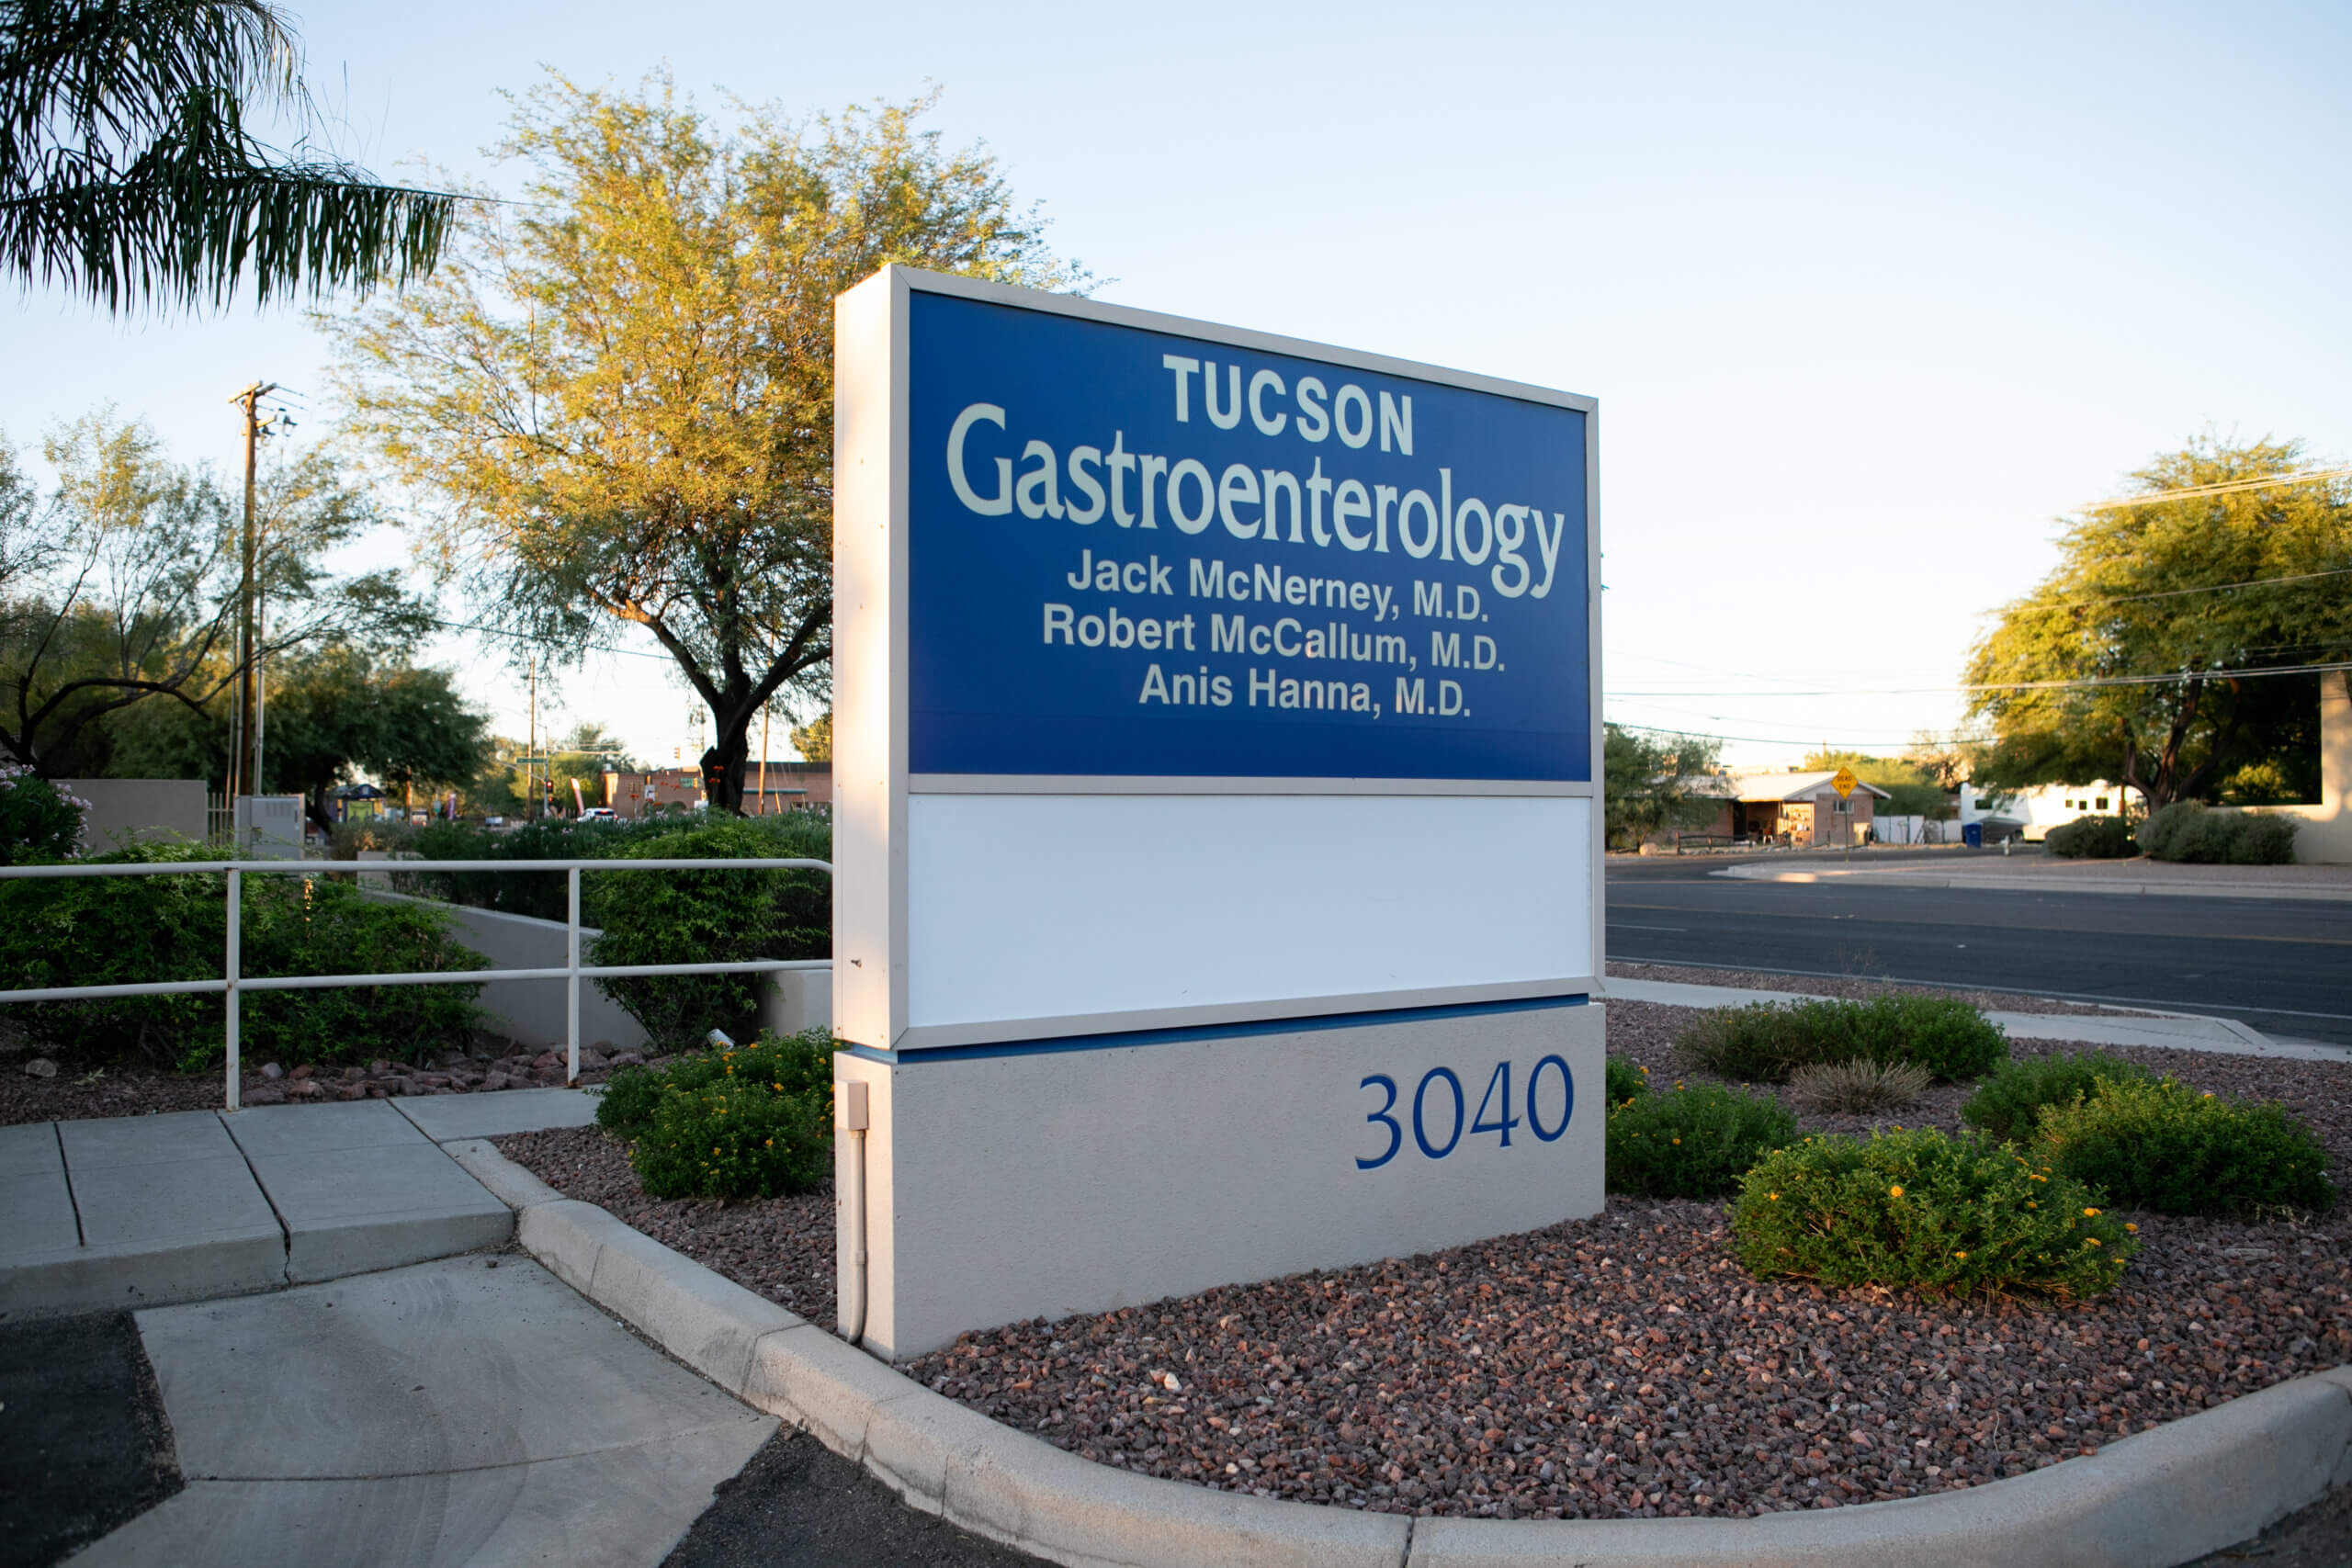 A large blue and white sign in the garden at the entrance to Tucson Gastroenterology Specialists detailing information about the digestive specialists